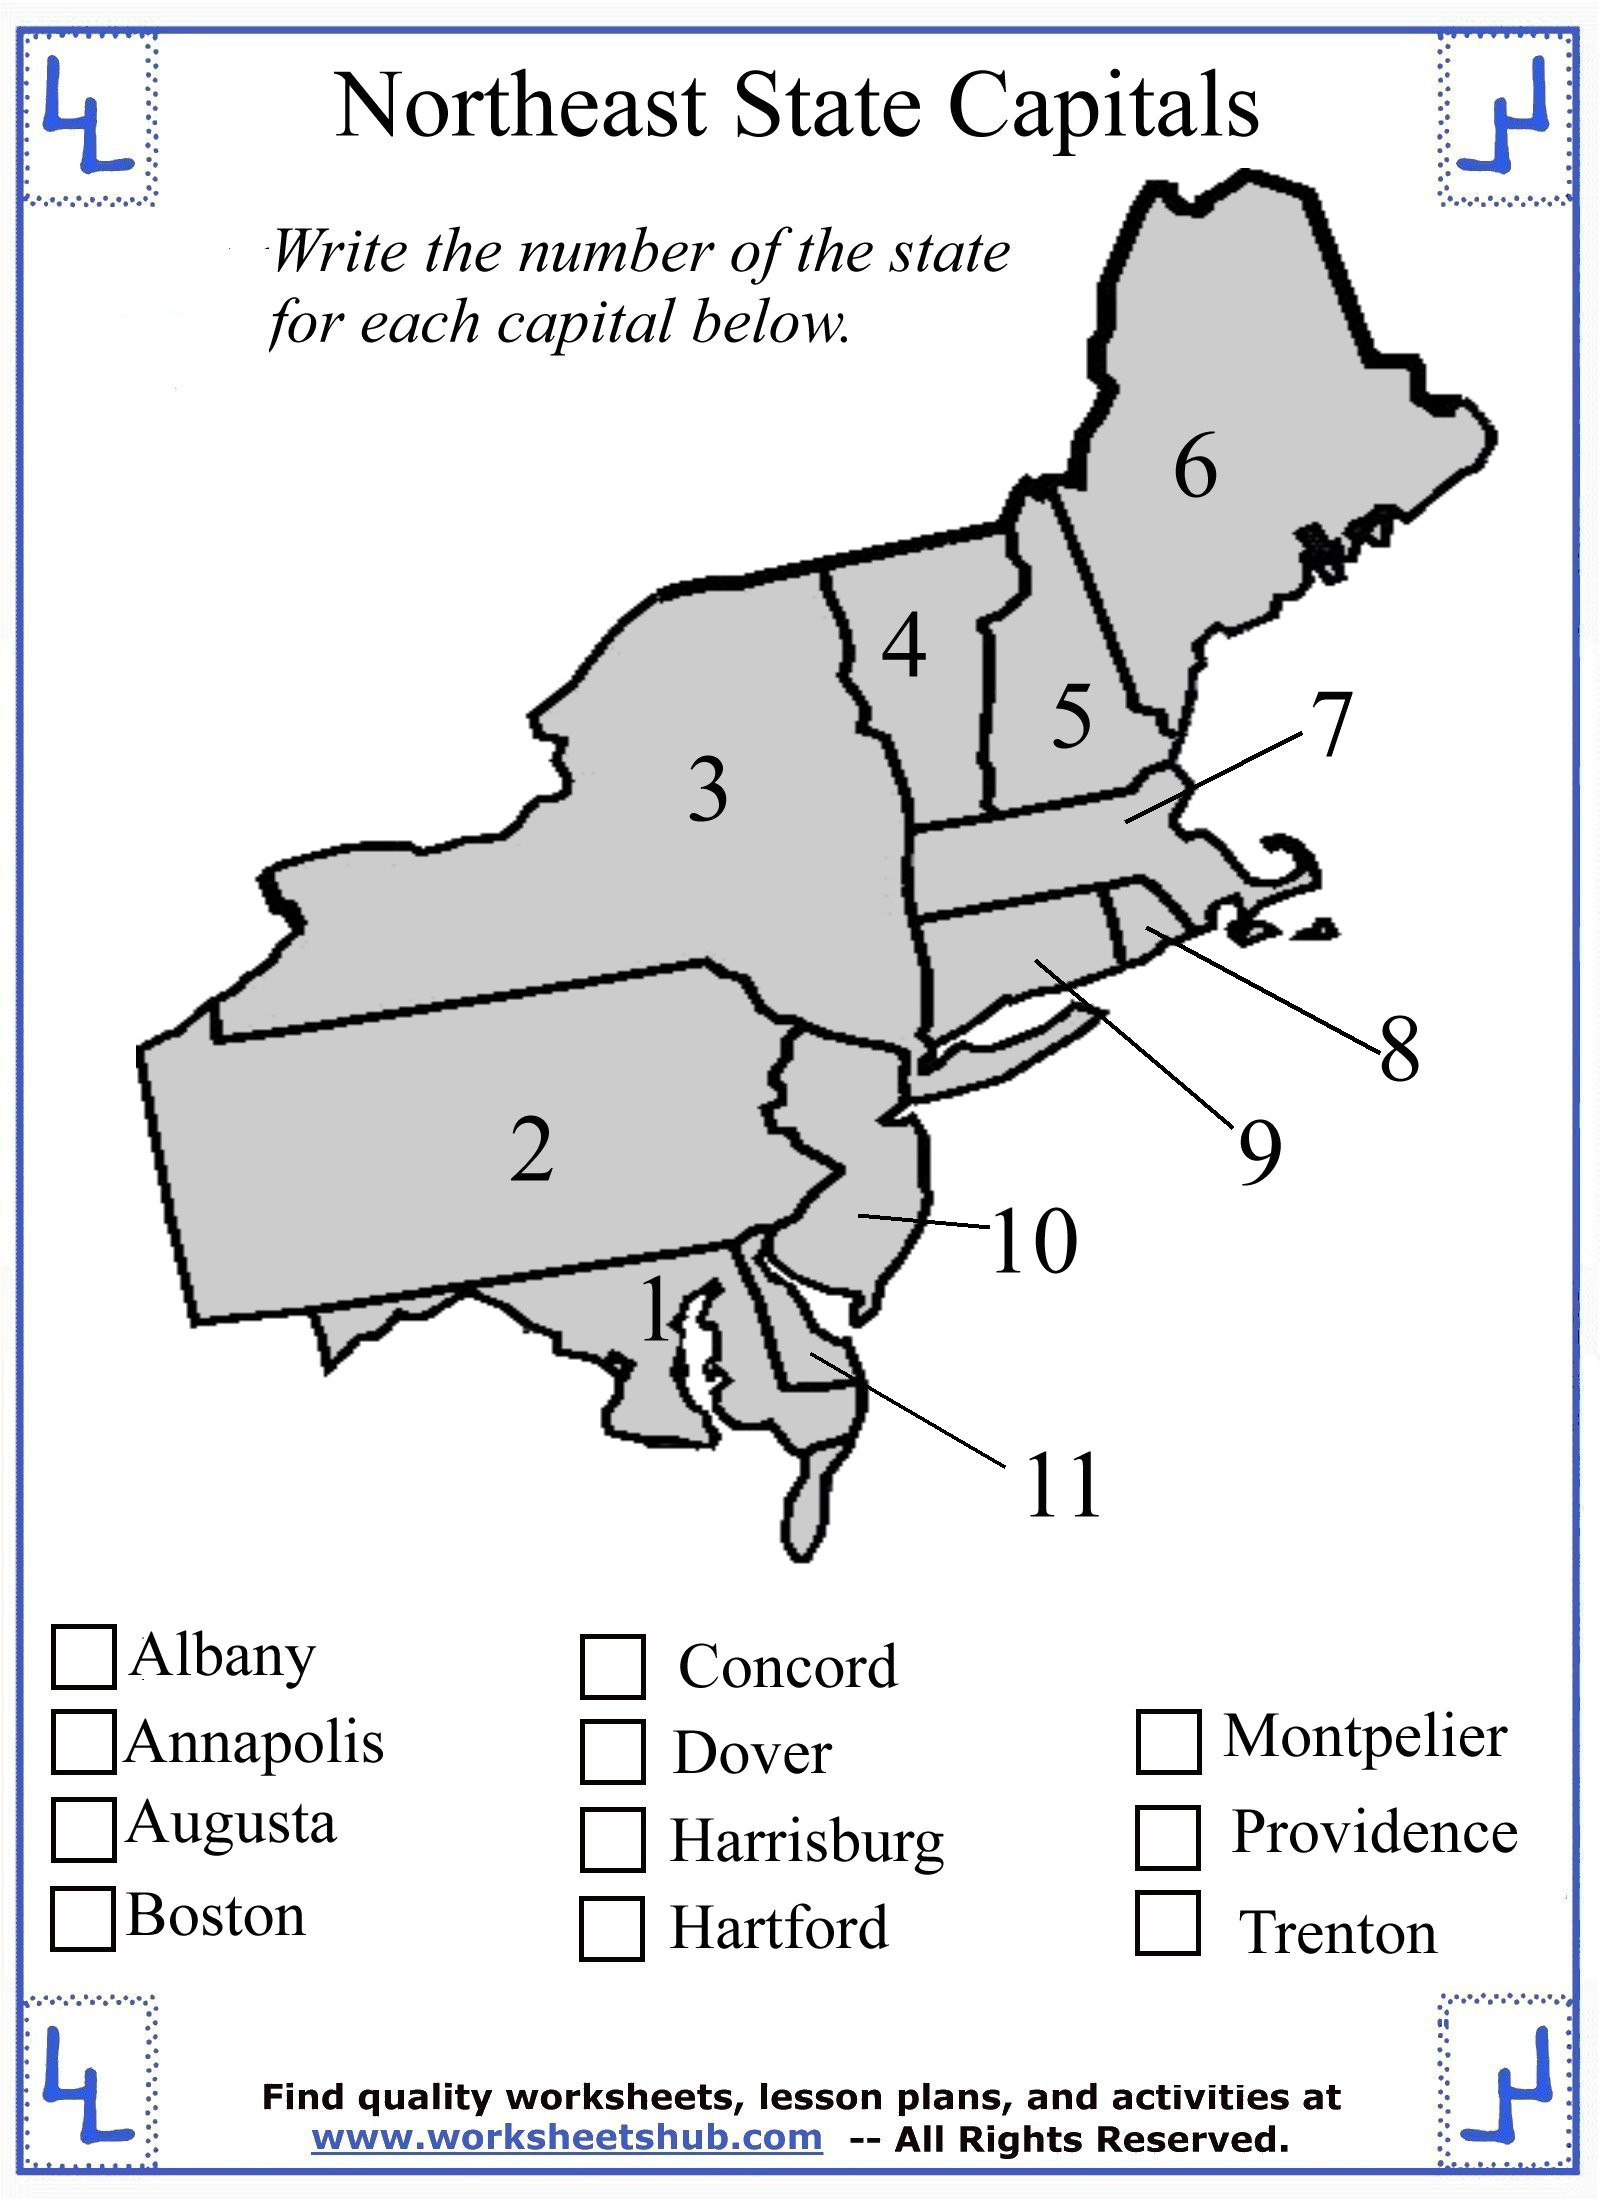 State and Capital Quiz Printable Fourth Grade social Stu S northeast Region States and